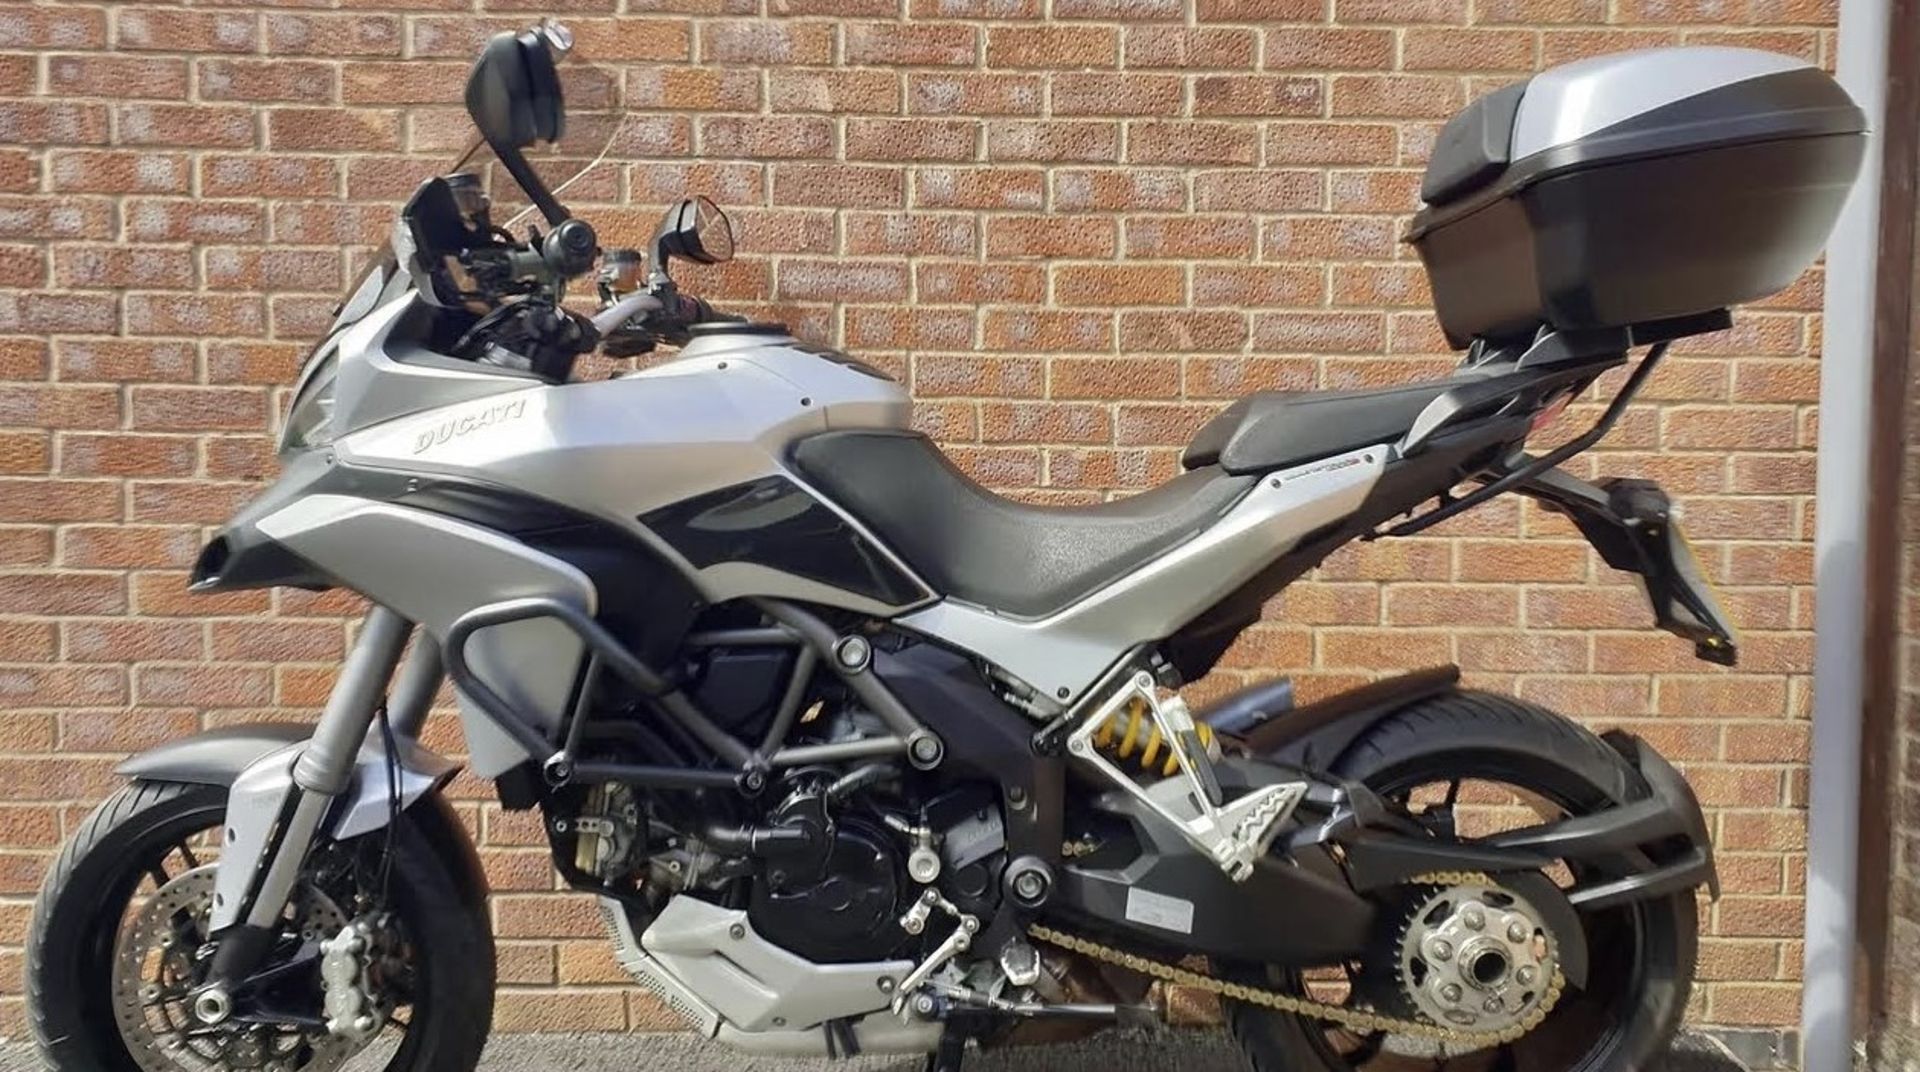 2015/15 REG DUCATI MULTISTRADA 1200 S TOURIN 1.2 PETROL SILVER MOTORCYCLE, SHOWING 1 FORMER KEEPER - Image 5 of 6